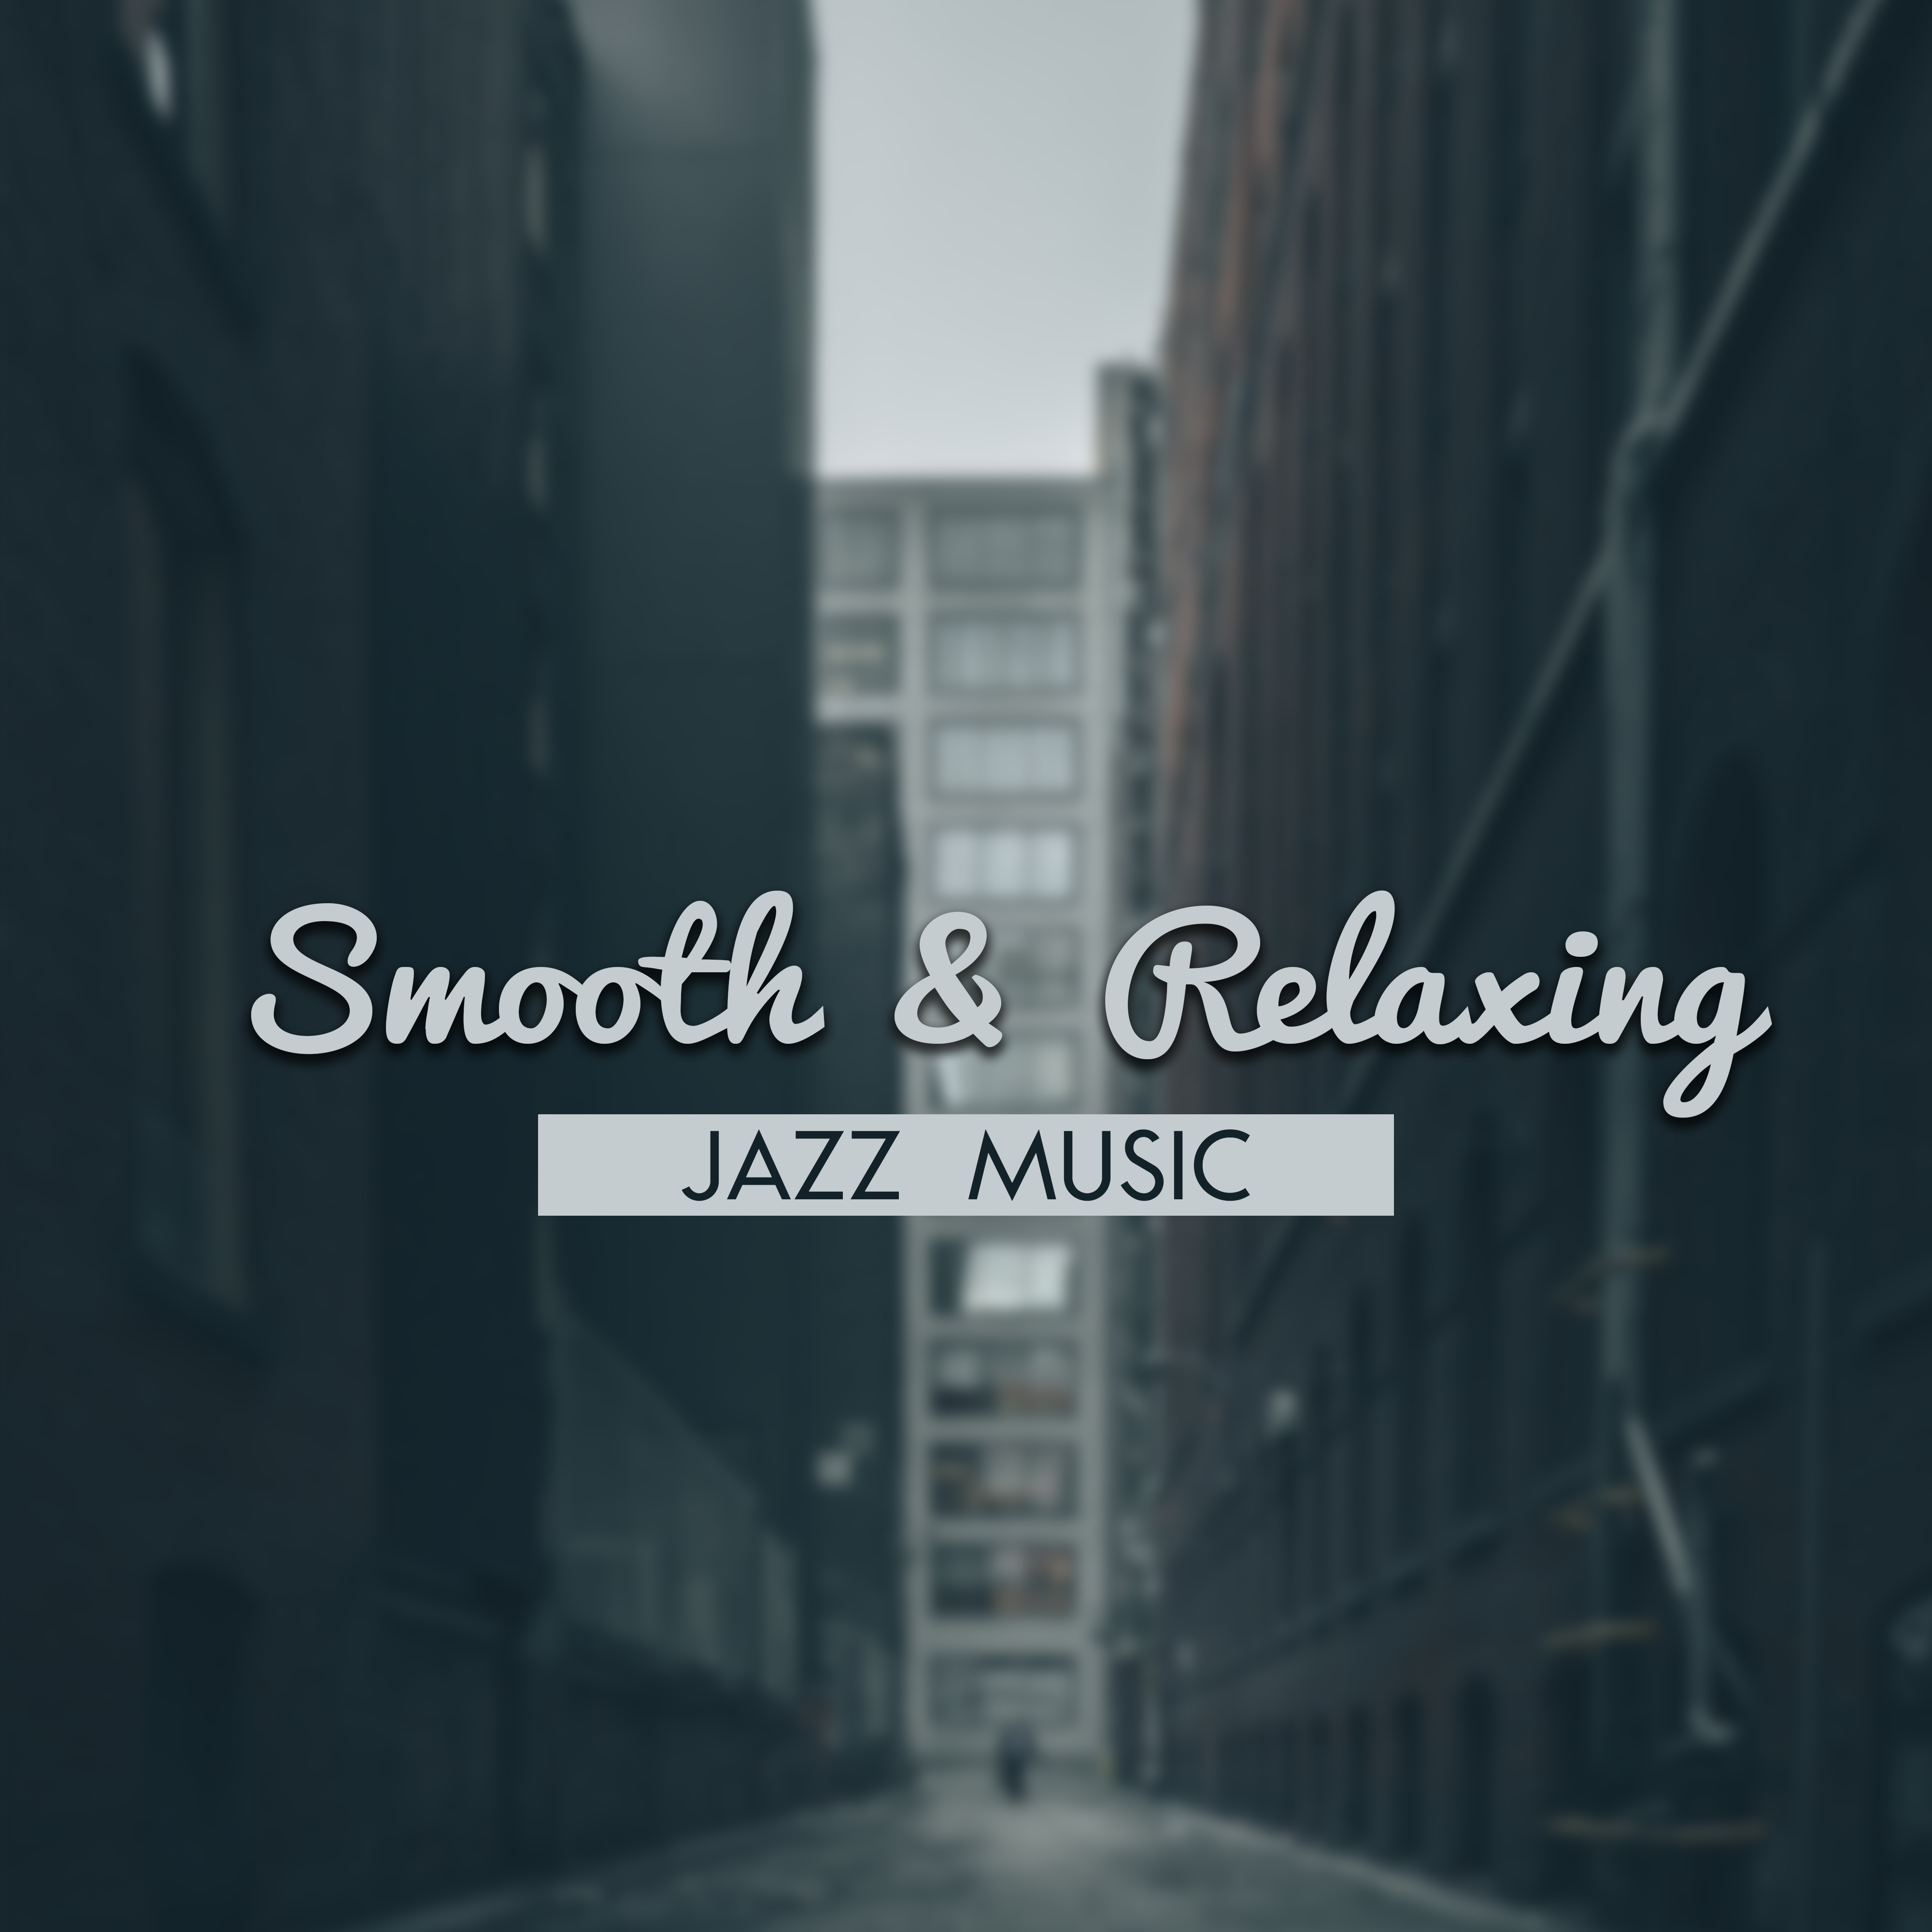 Smooth  Relaxing Jazz Music  Soft Jazz Melodies for Mind Calmness, Stress Relief, Evening with Jazz, Piano Rest